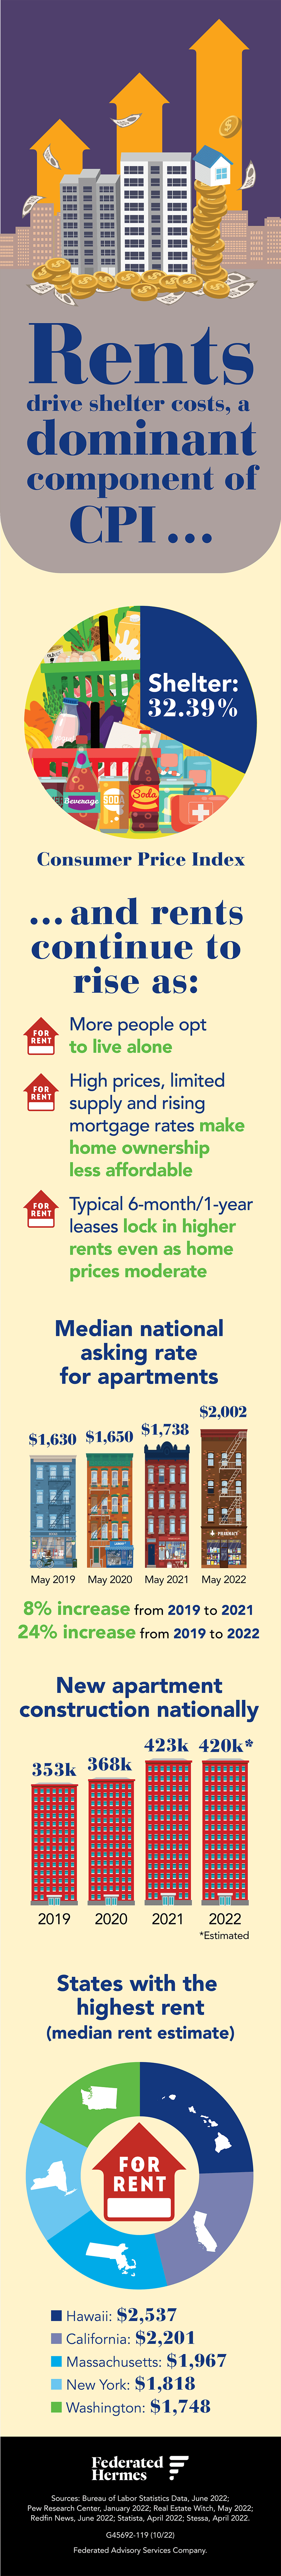 Rents drive shelter costs, a dominant component of Consumer Price Index. Shelter is 32.29% of Consumer Price Index. Rents continue to rise as: more people opt to live alone, high prices, limited supply and rising mortgage rates make home ownership less affordable, typical 6-month to 1-year leases lock in higher rents even as home prices moderate. Median national asking rate for apartments. $1,630 in May 2019, $1,650 in May 2020, $1,738 in May 2021, $2,002 in May 2022. An 8% increase from 2019 to 2021. A 24% increase from 2019 to 2022. New apartment construction nationally. 353,000 in 2019, 368,000 in 2020, 423,000 in 2021 and an estimated 420,000* in 2022. States with the highest rent (median rent estimate). $2,537 in Hawaii, $2,201 in California, $1,967 in Massachusetts, $1,818 in New York, $1,748 in Washington. Information sources: Bureau of Labor Statistics Data, June 2022; Pew Research Center, January 2022; Real Estate Witch, May 2022; Redfin News, June 2022; Statista, April 2022; Stessa, April 2022. 